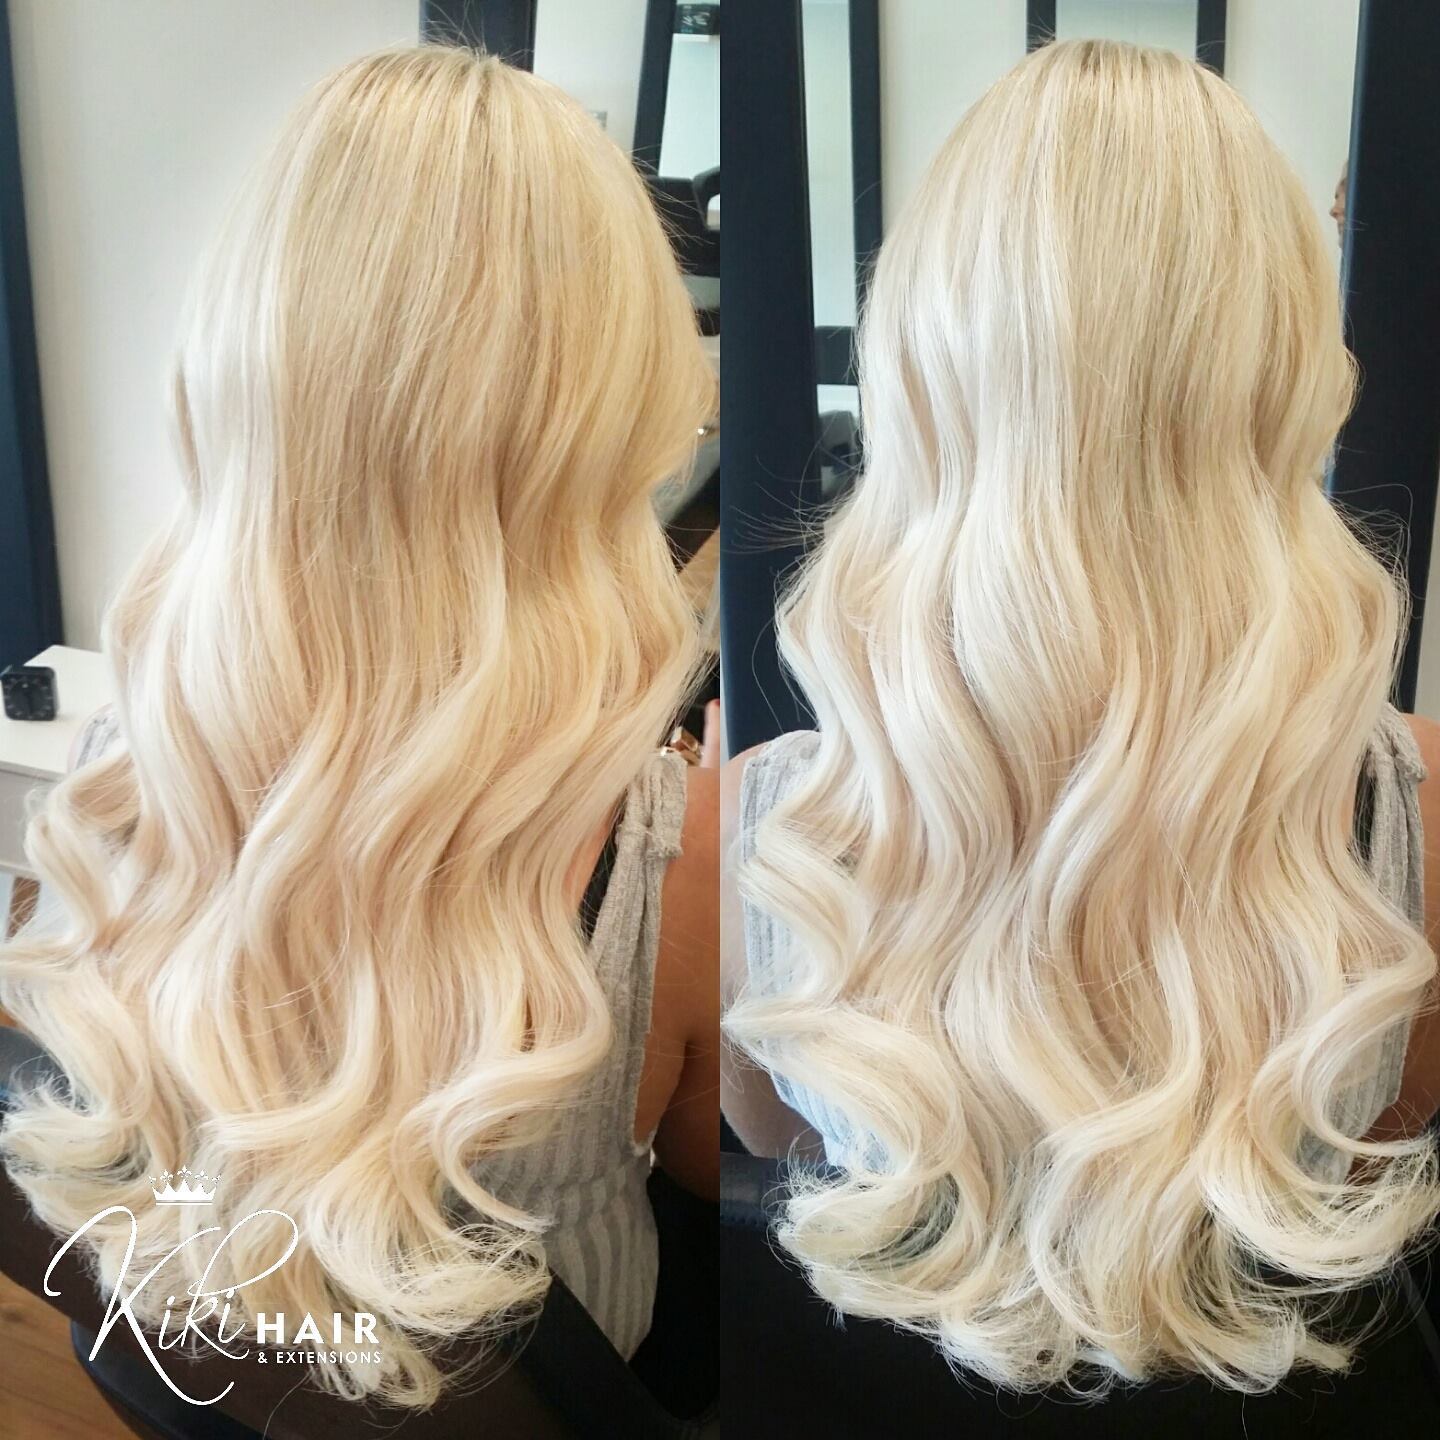 malibu blonde #613 halo hair extensions 26inch classic